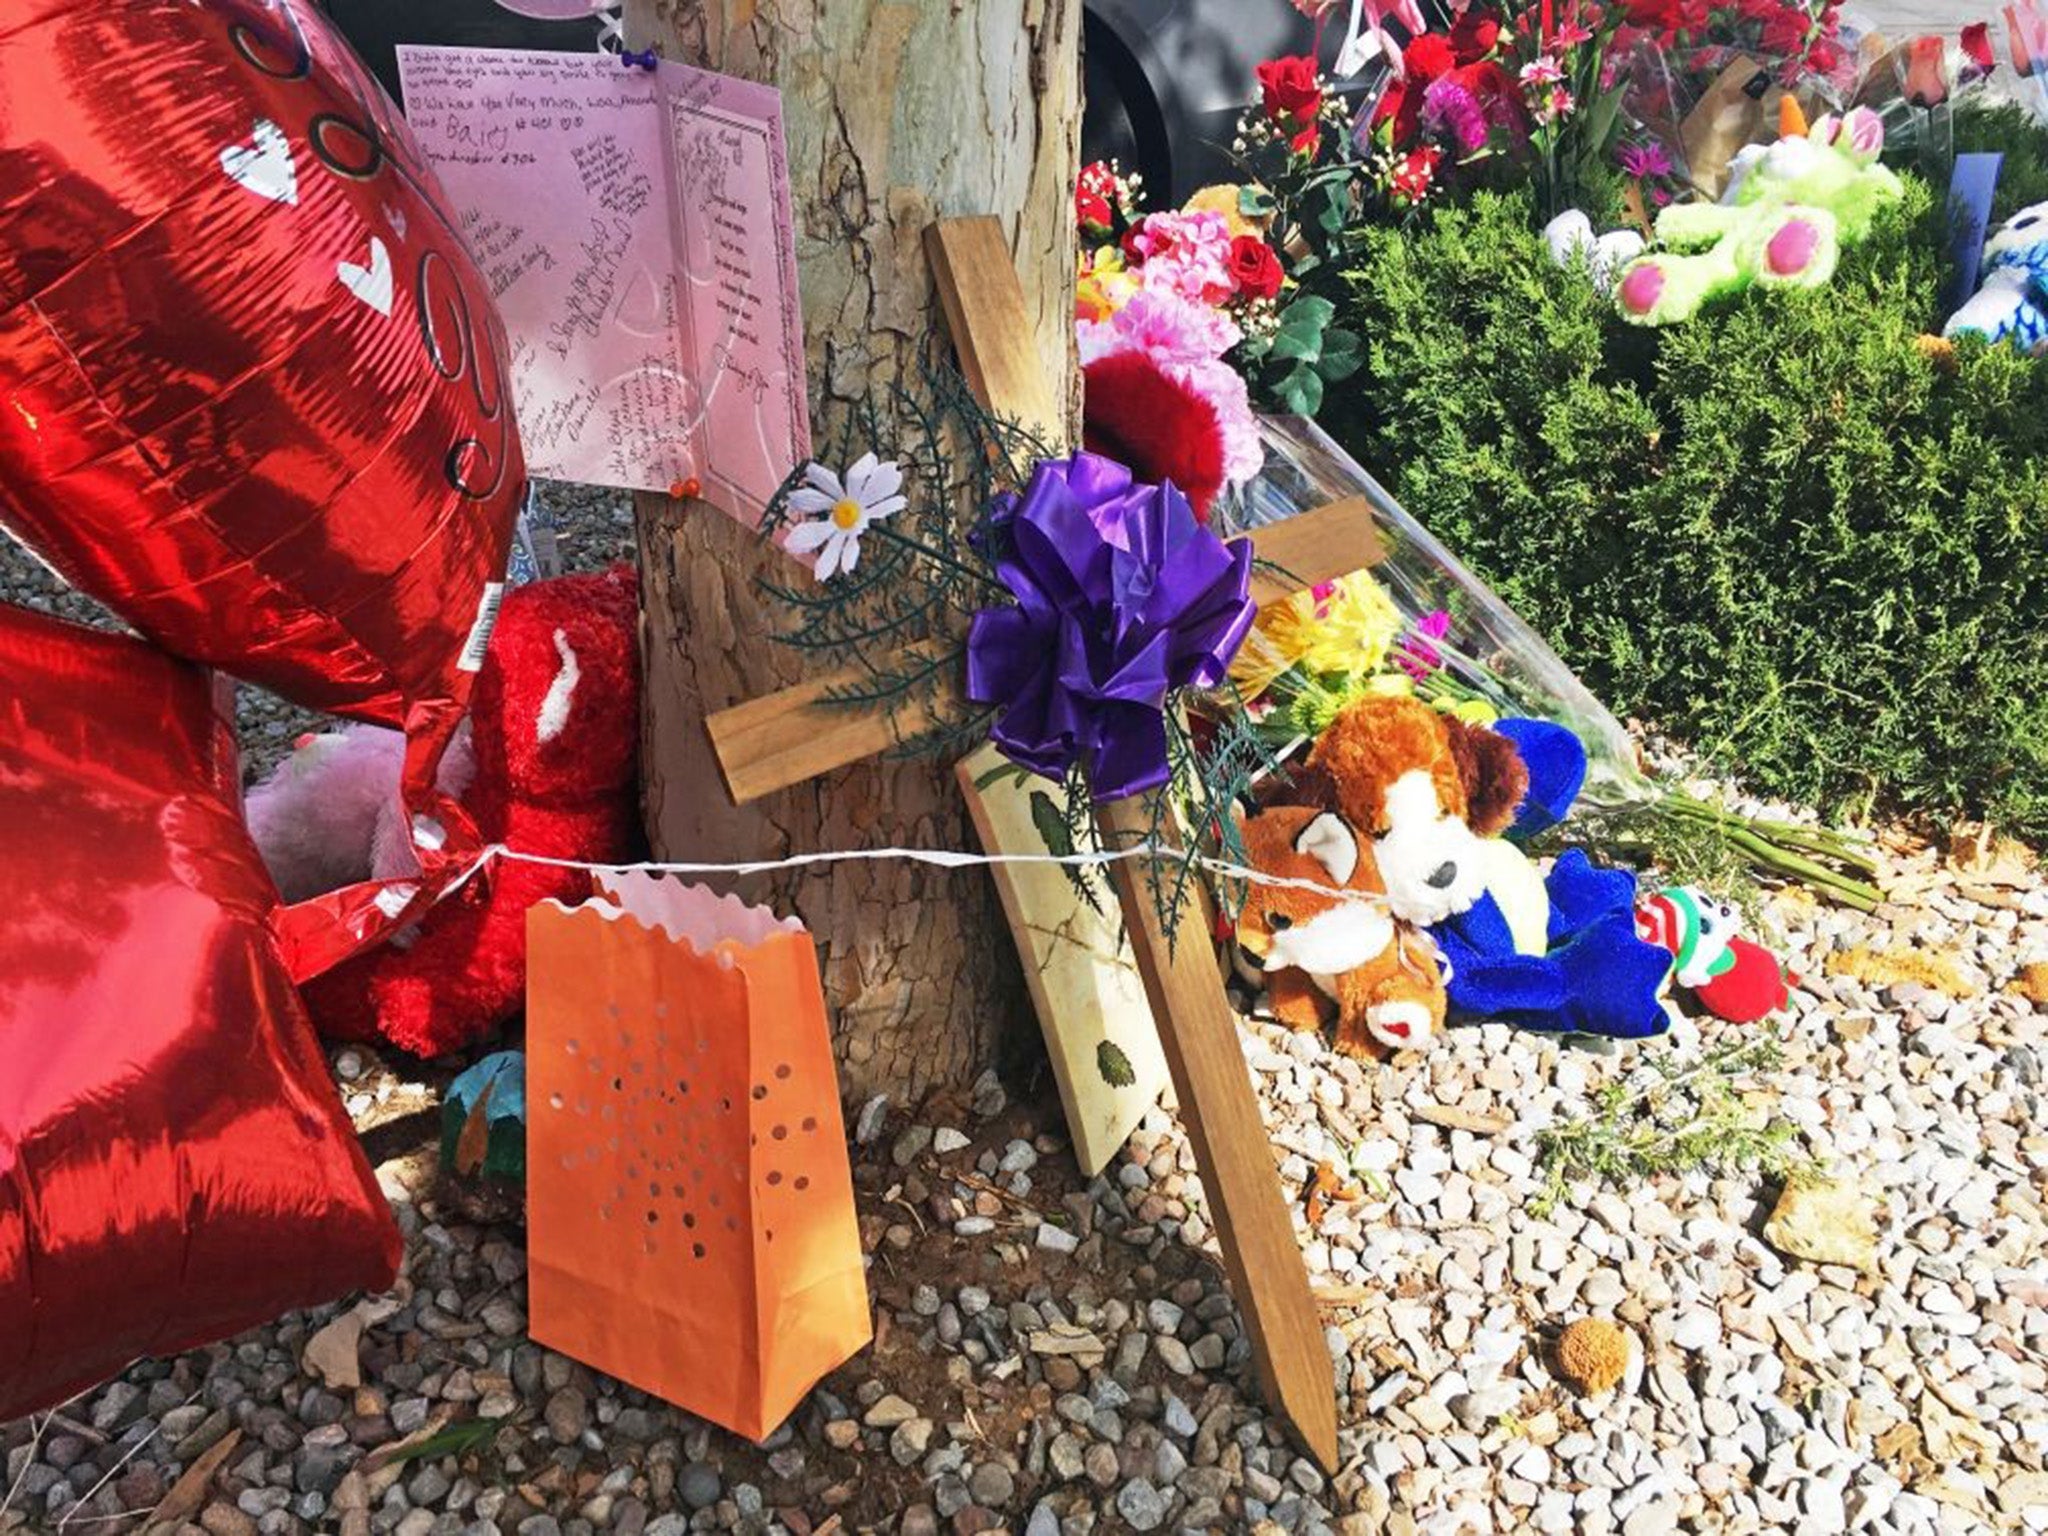 Tributes left to Victoria Martens who was raped and murdered at her home in Albuquerque, New Mexico